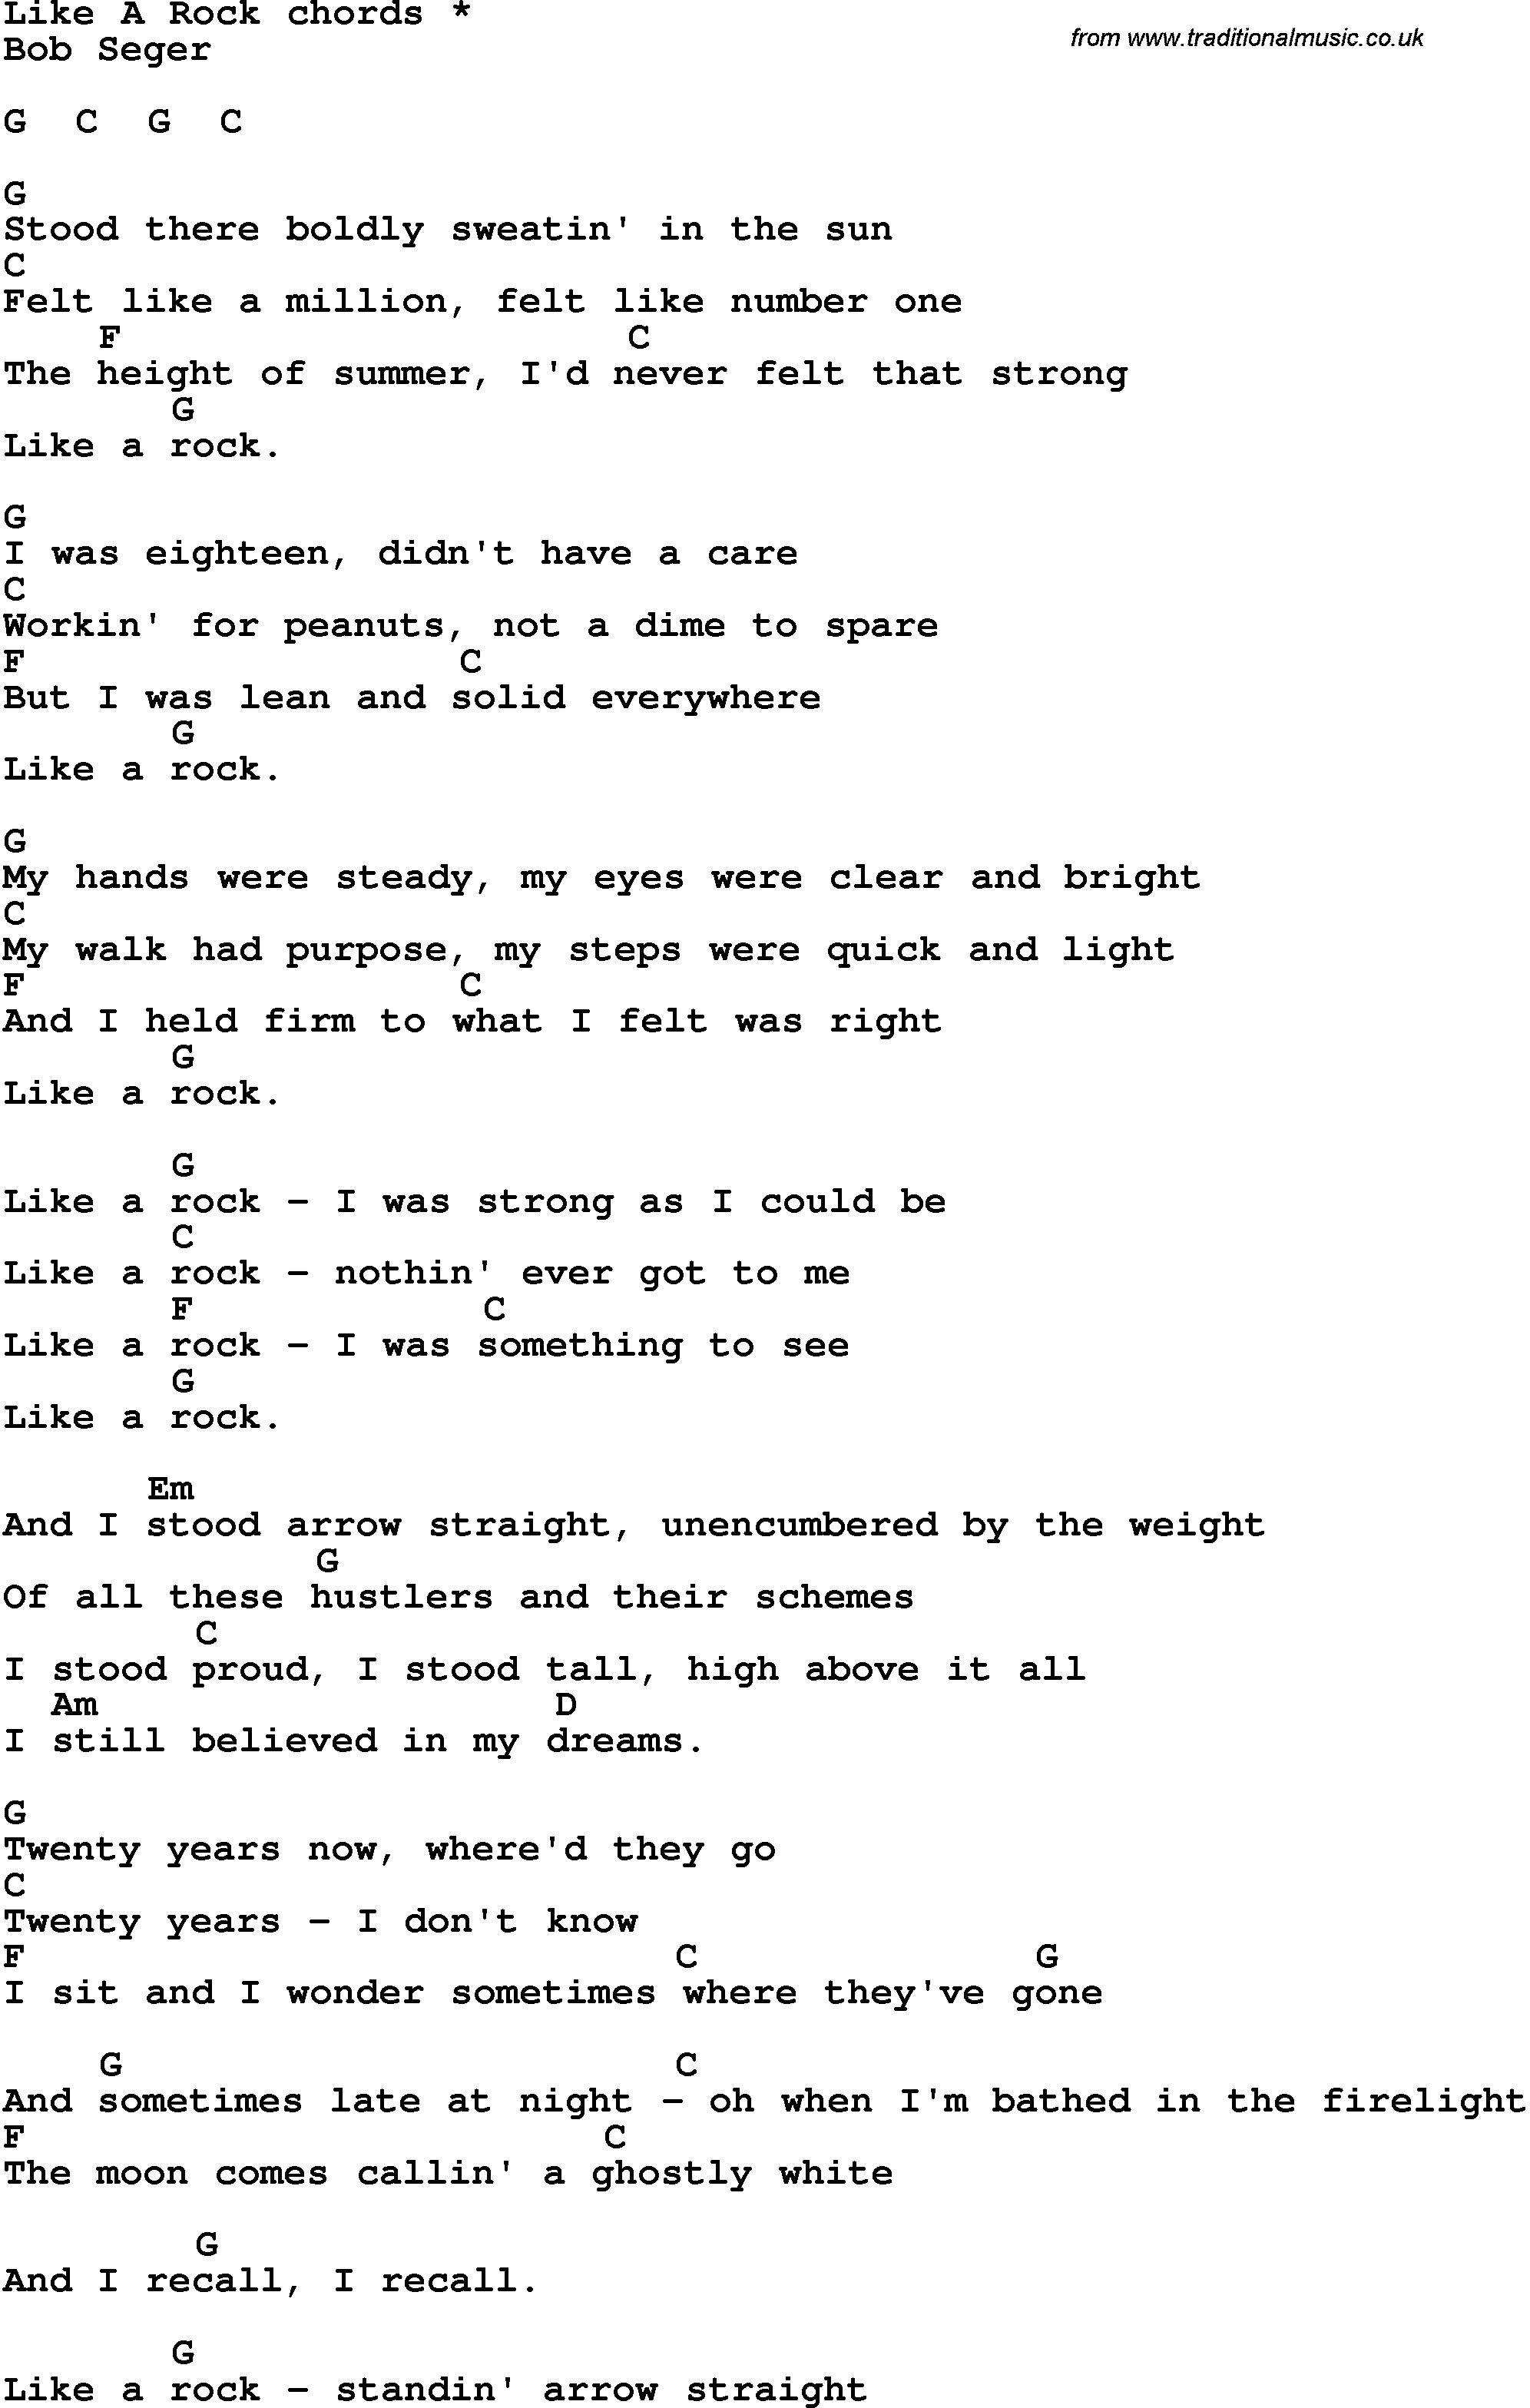 Song Lyrics with guitar chords for Like A Rock